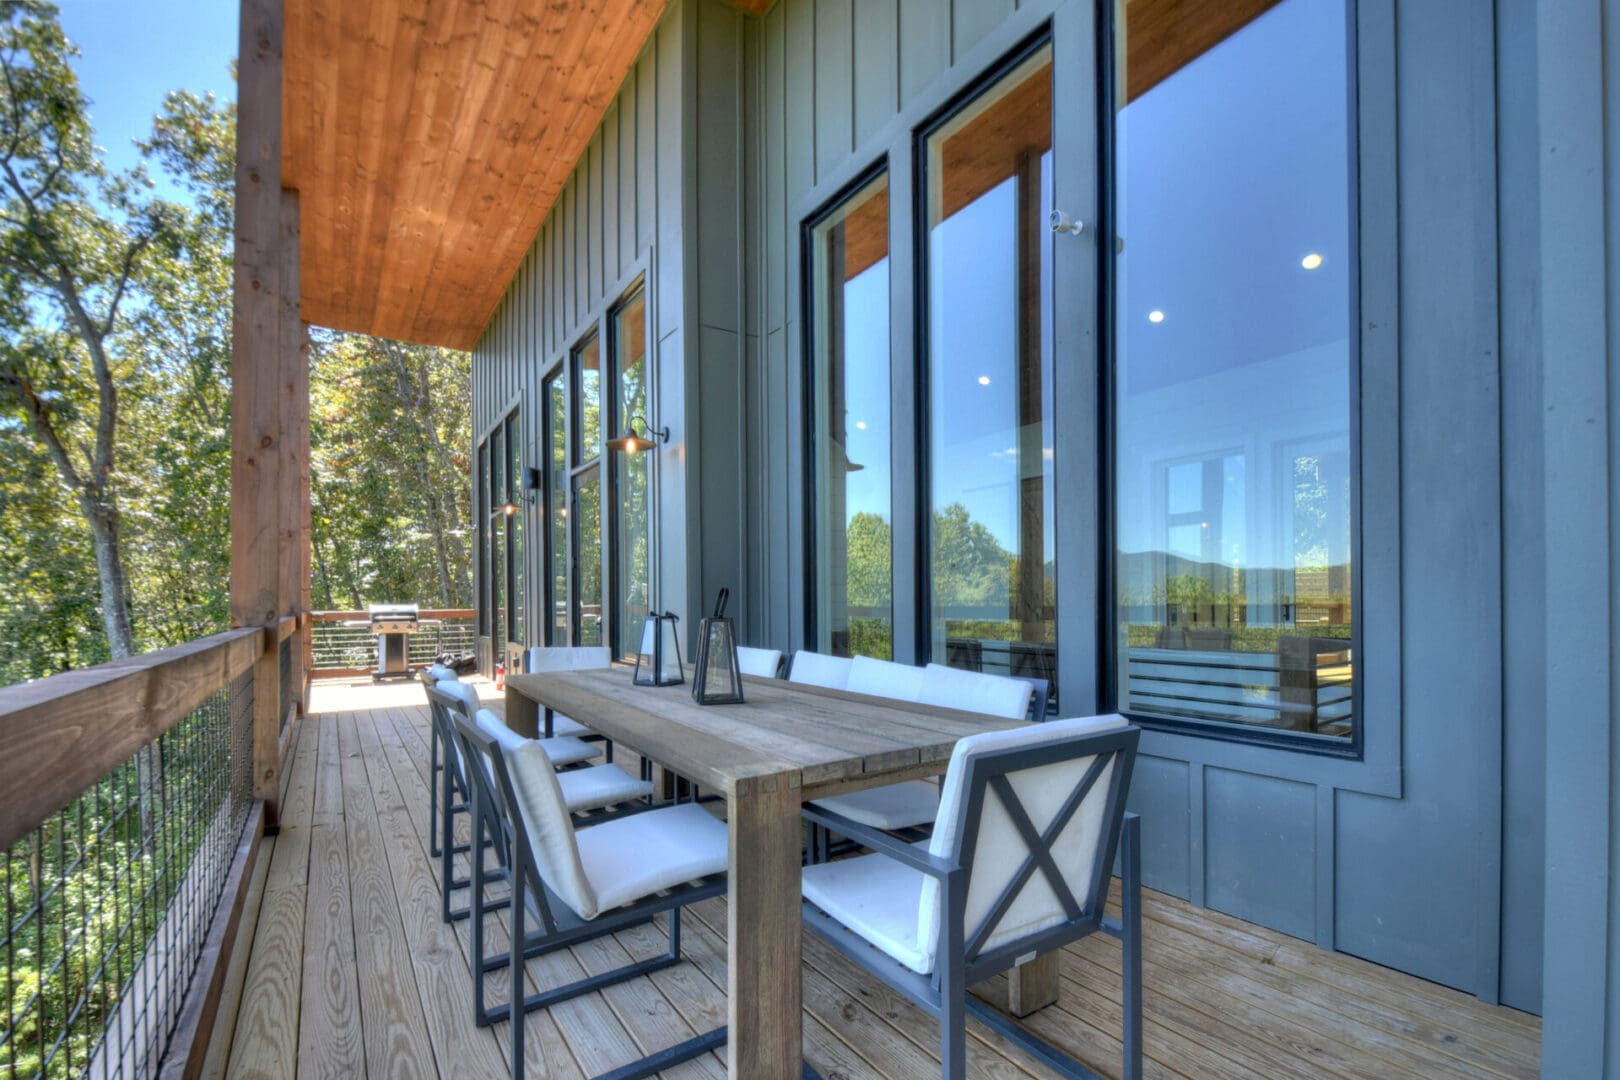 Architectural Design services: A deck with a table and chairs overlooking a wooded area, designed with expertise in architectural design services.